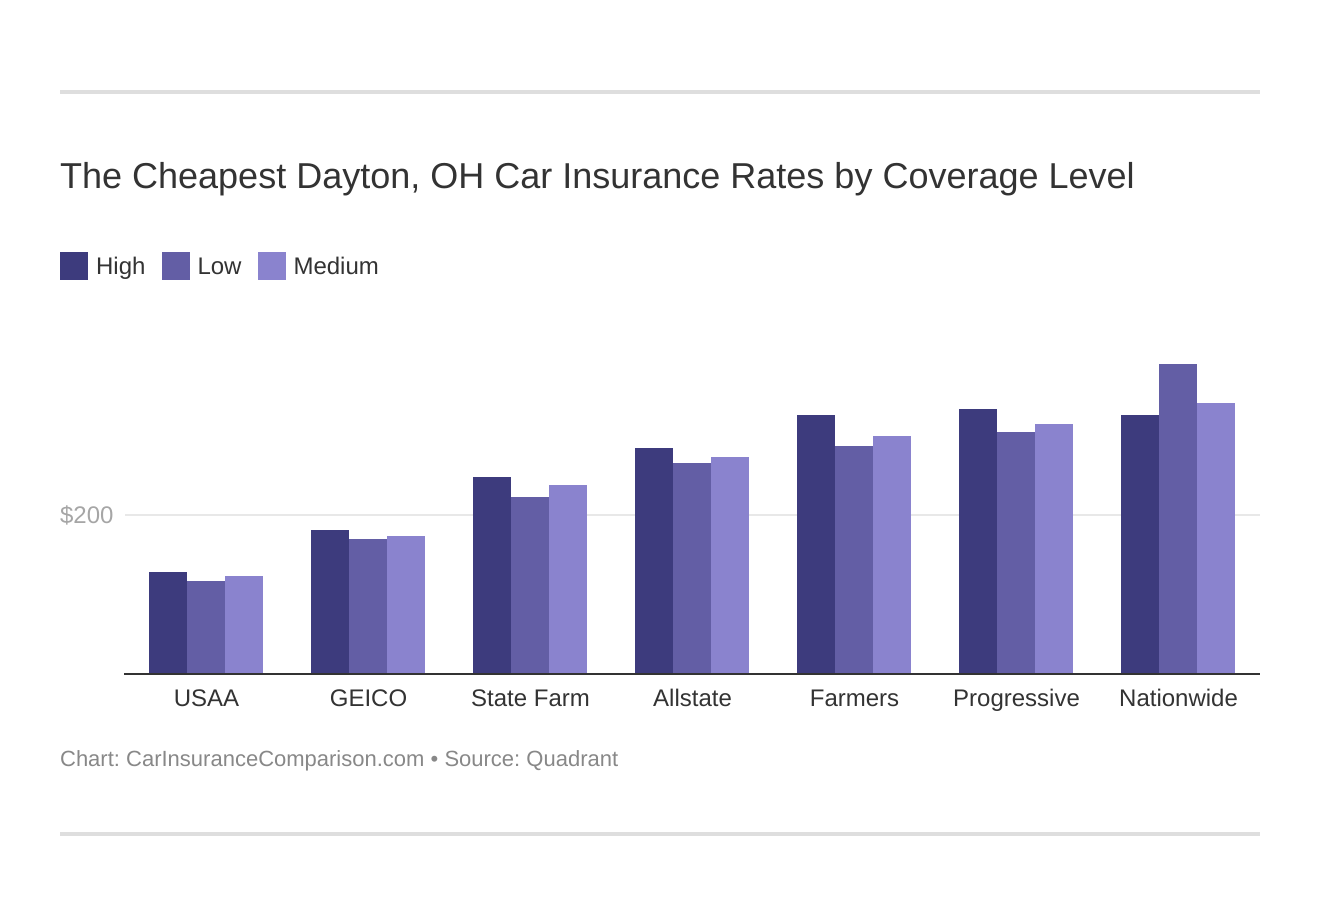 The Cheapest Dayton, OH Car Insurance Rates by Coverage Level